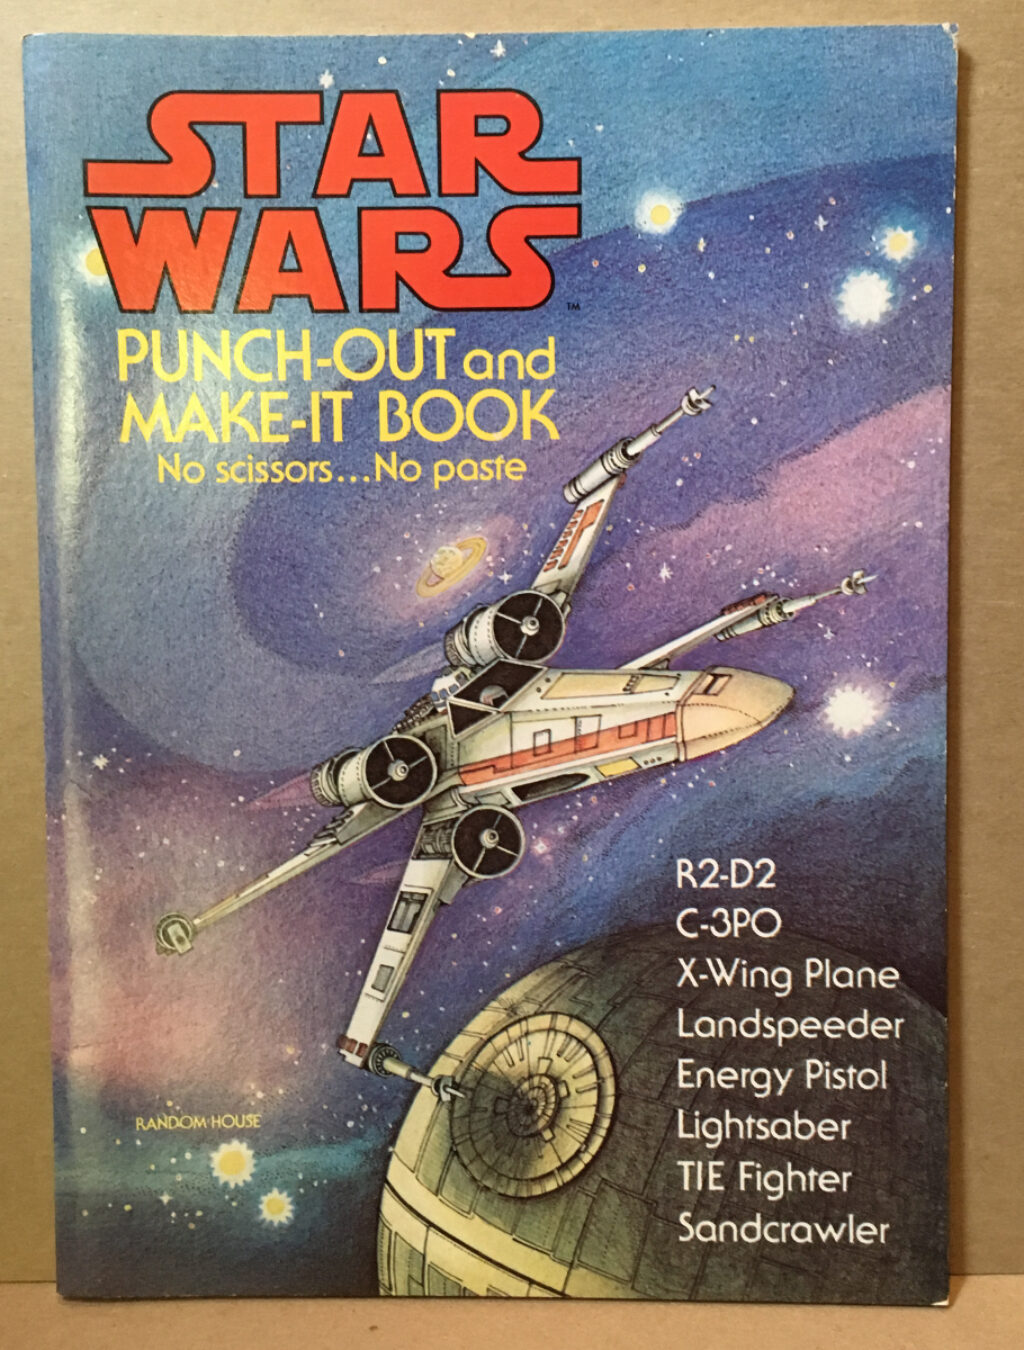 star wars punch-out and make-it book 1